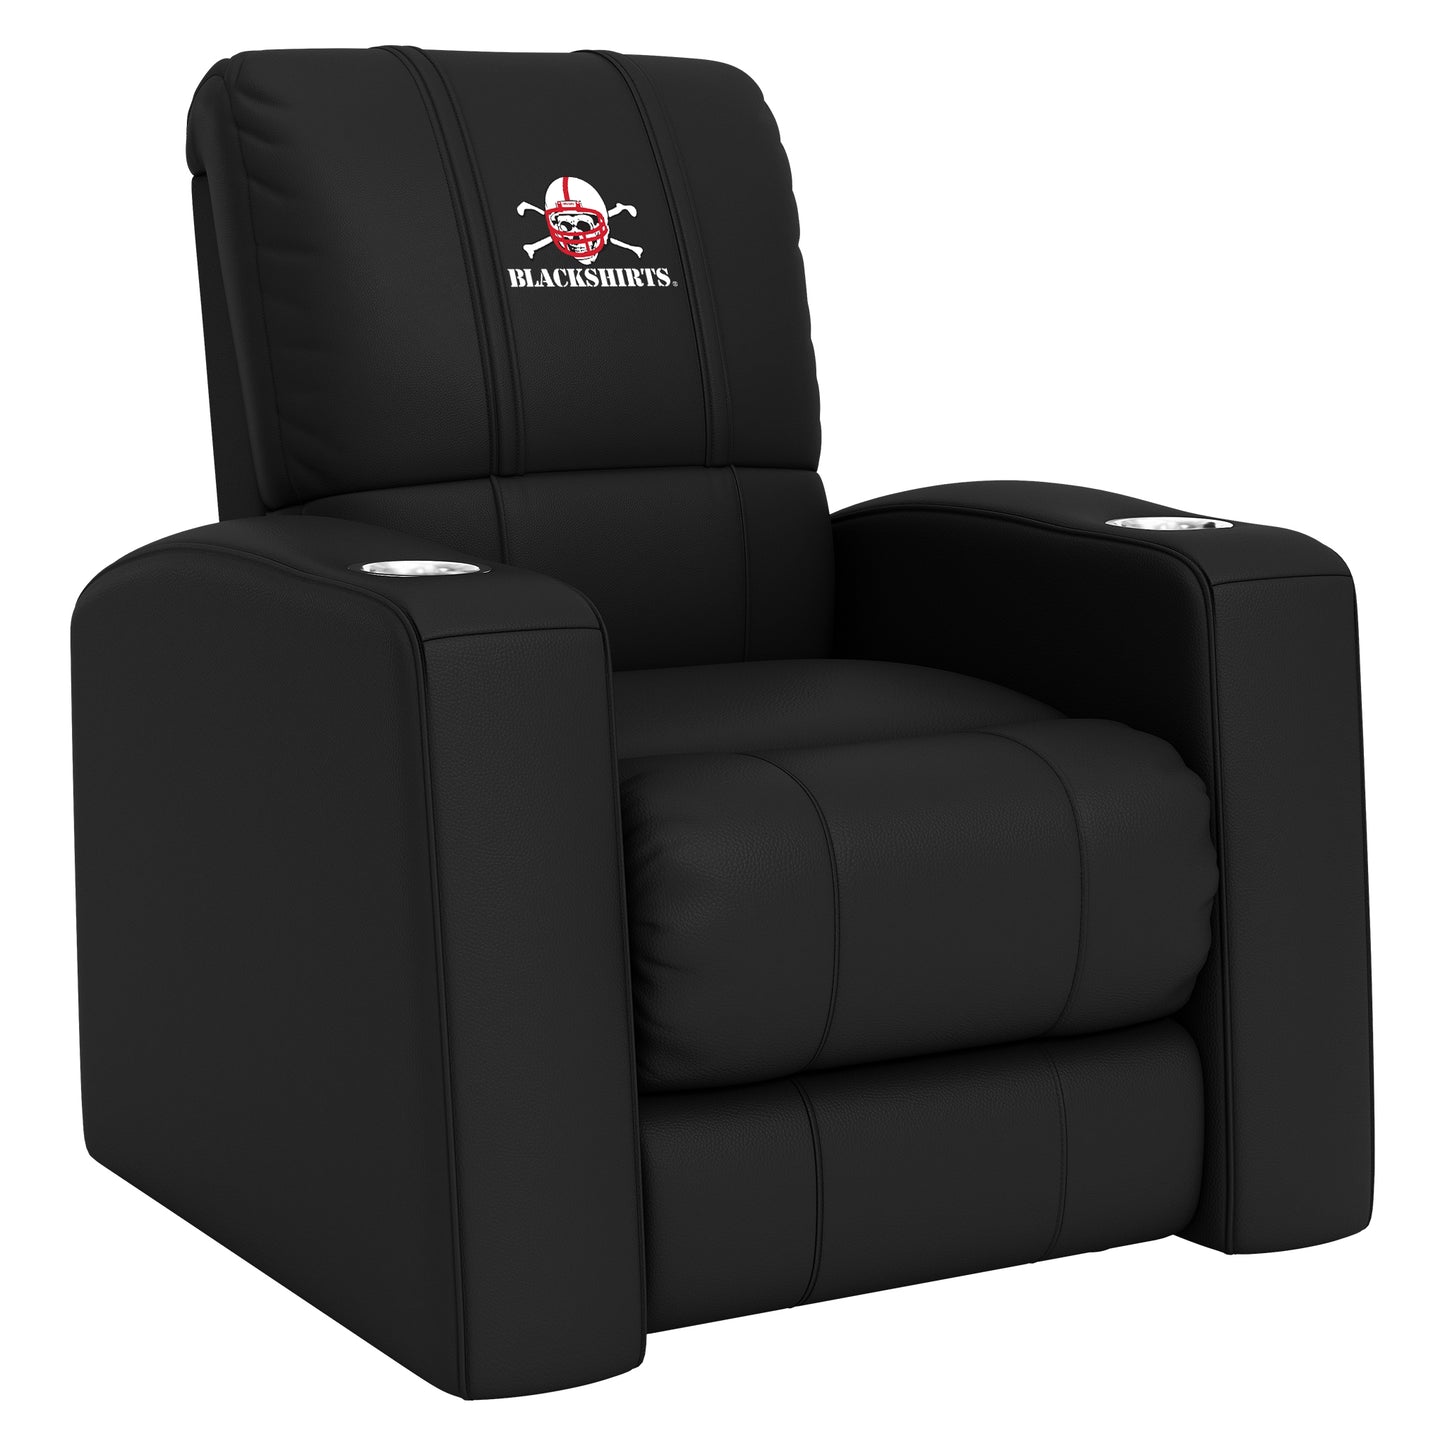 Relax Home Theater Recliner with Nebraska Cornhuskers Secondary